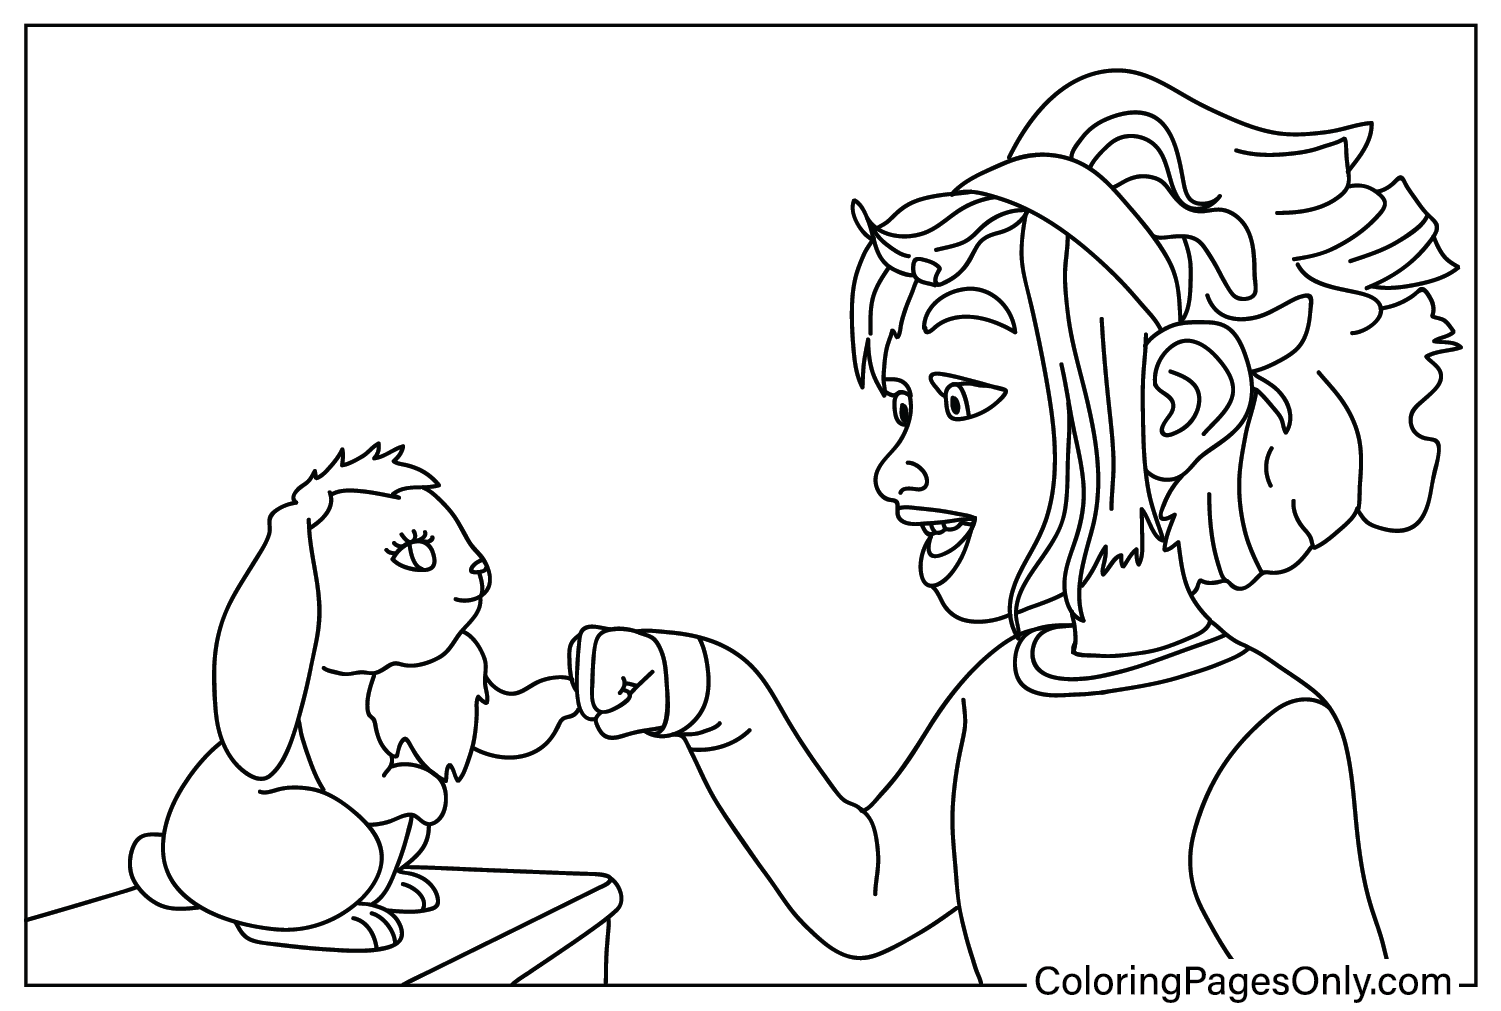 Over The Moon Coloring Pages For Kids